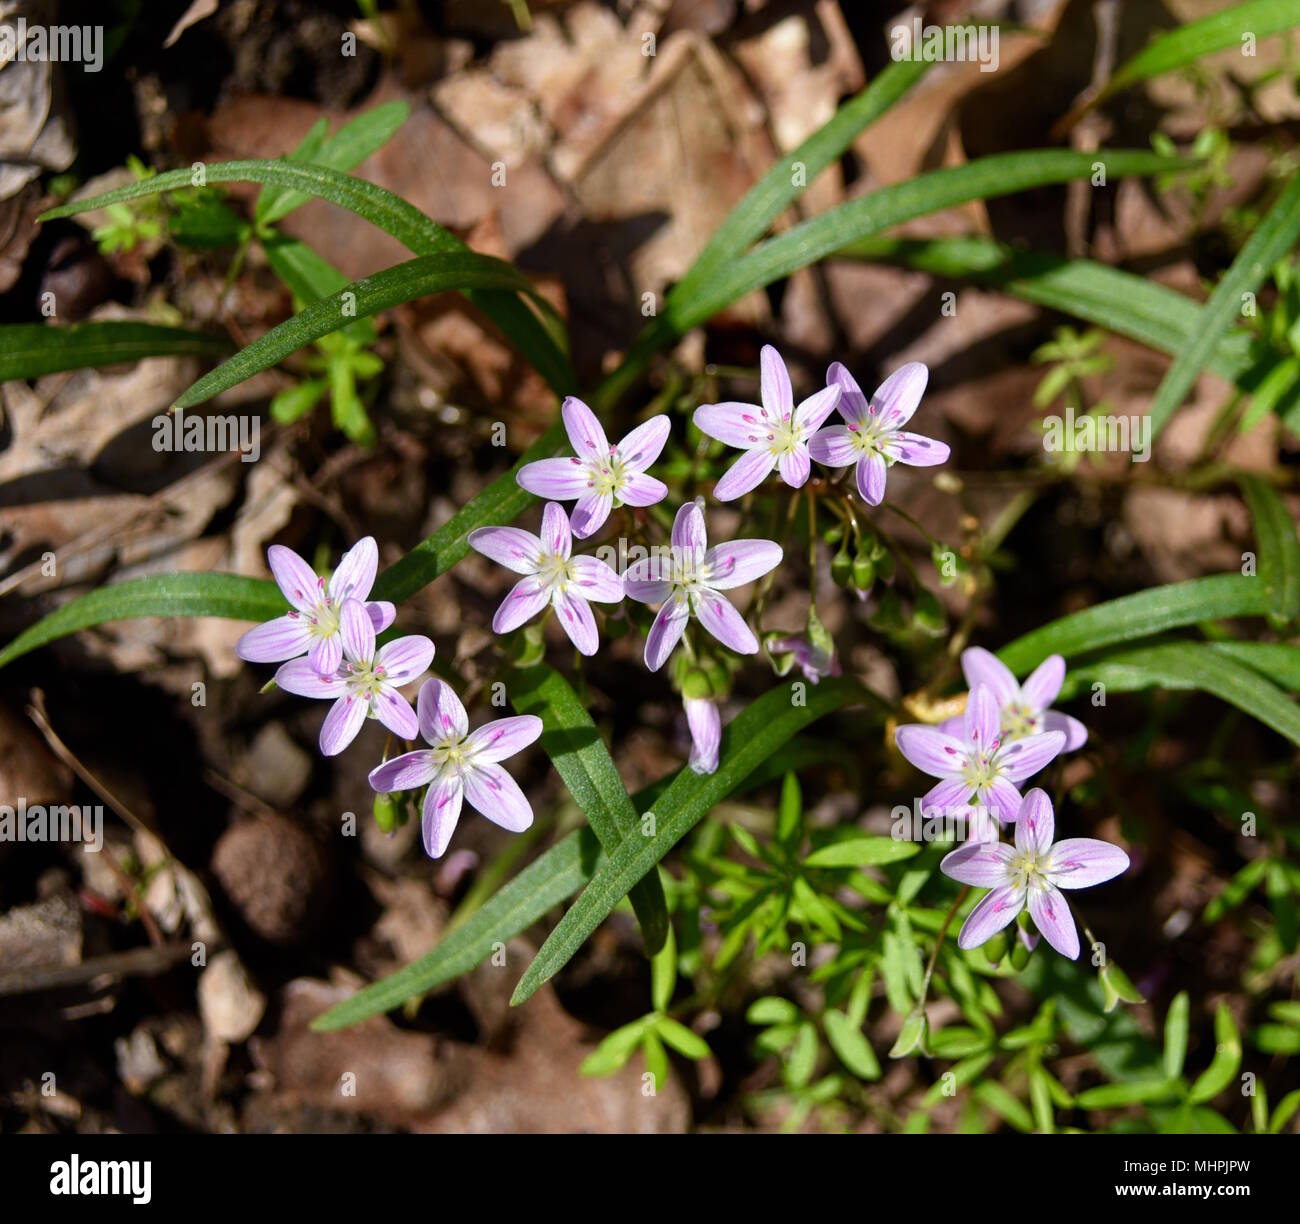 Dainty pink flowers and linear green leaves of spring beauty plants in a forest. Stock Photo